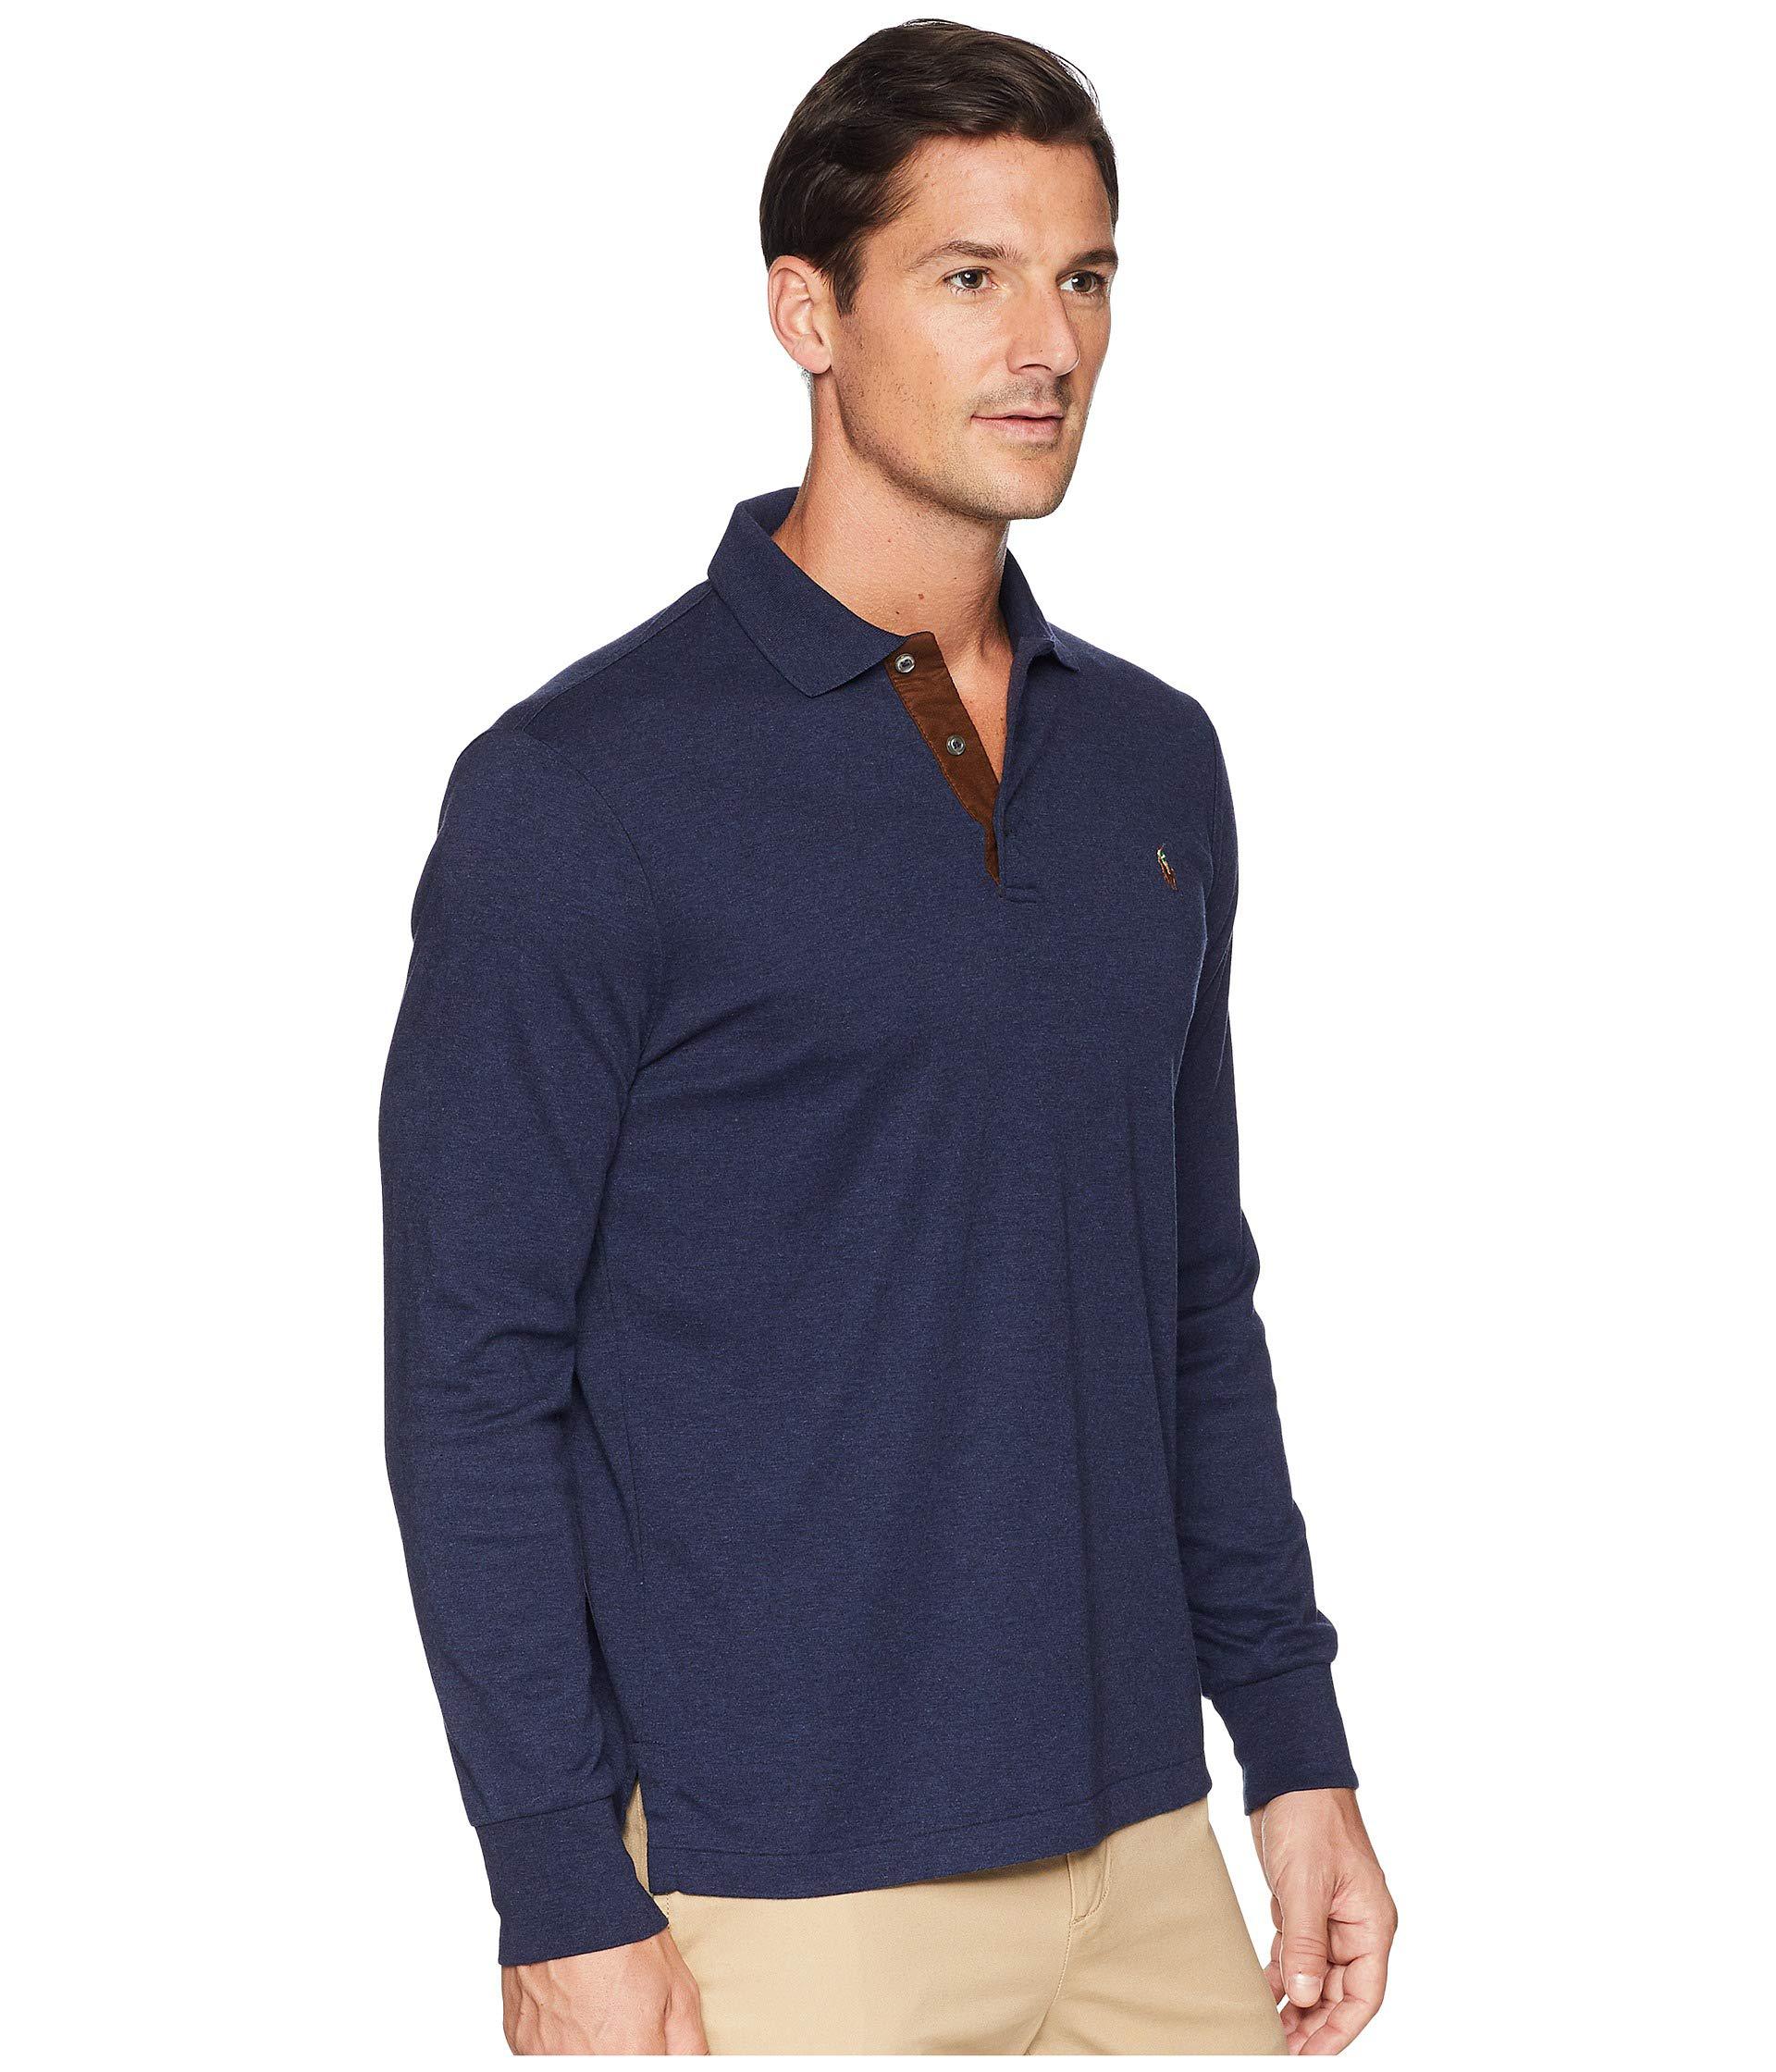 Lyst - Polo Ralph Lauren Classic Fit Long Sleeve Polo in Blue for Men